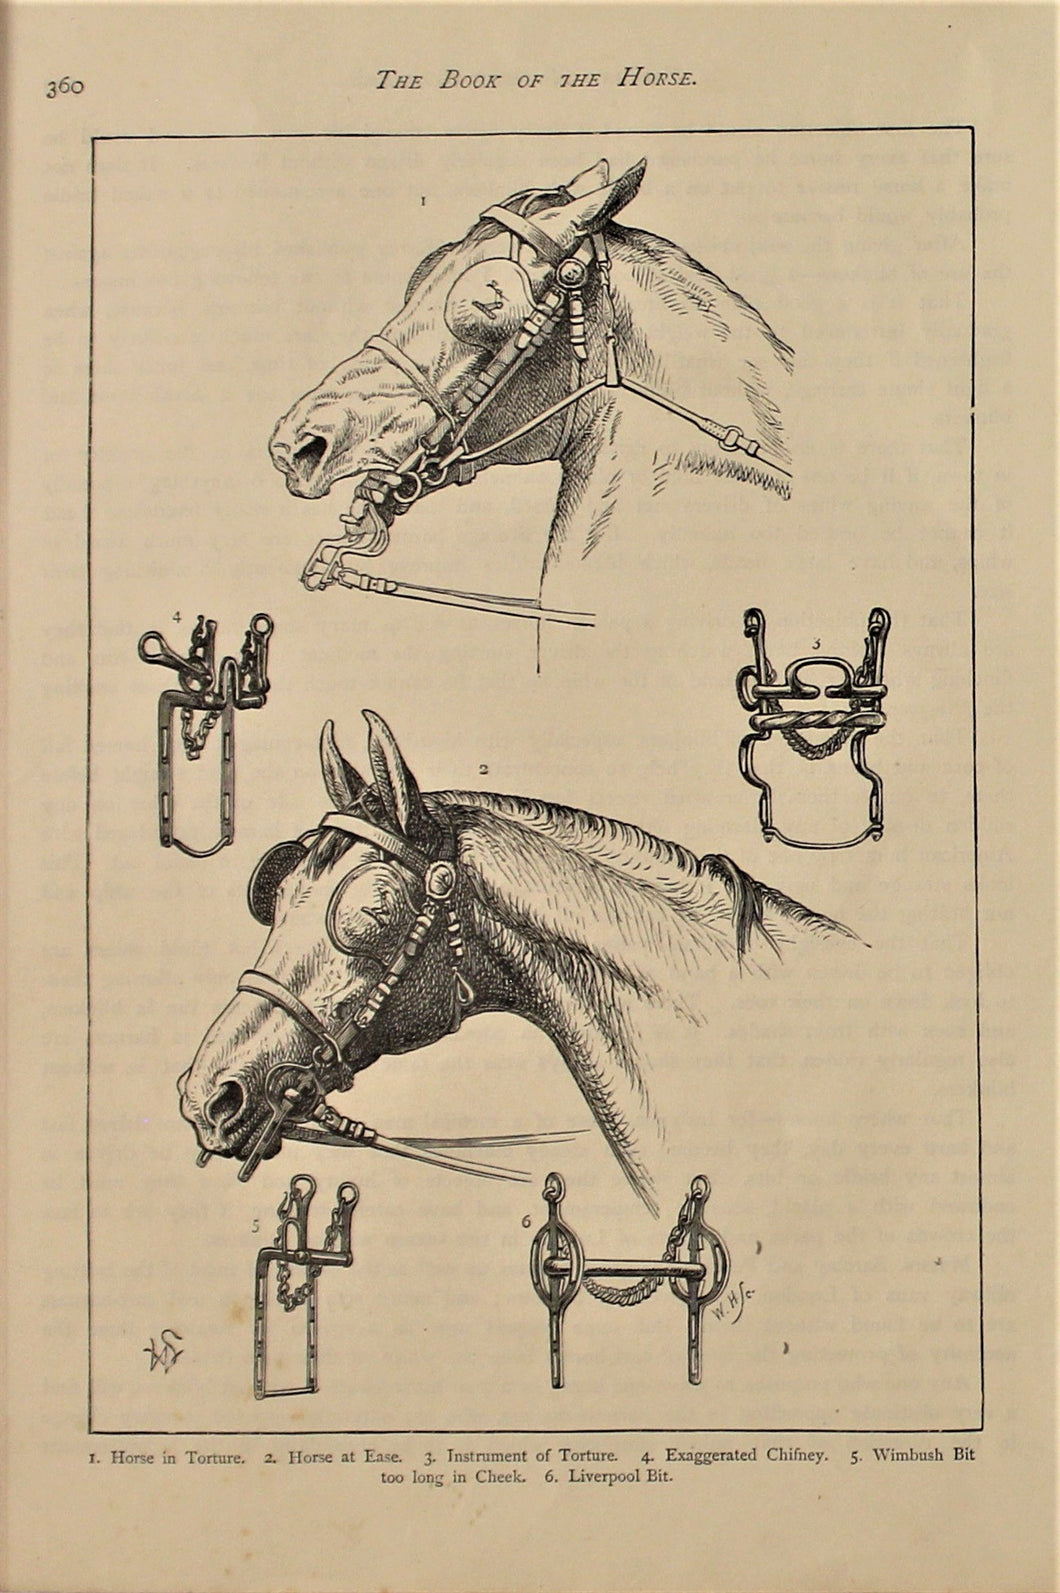 Sporting, Equestrian, Horse at Ease, Horse in Torture, Cassells, The Book of the Horse, 1873